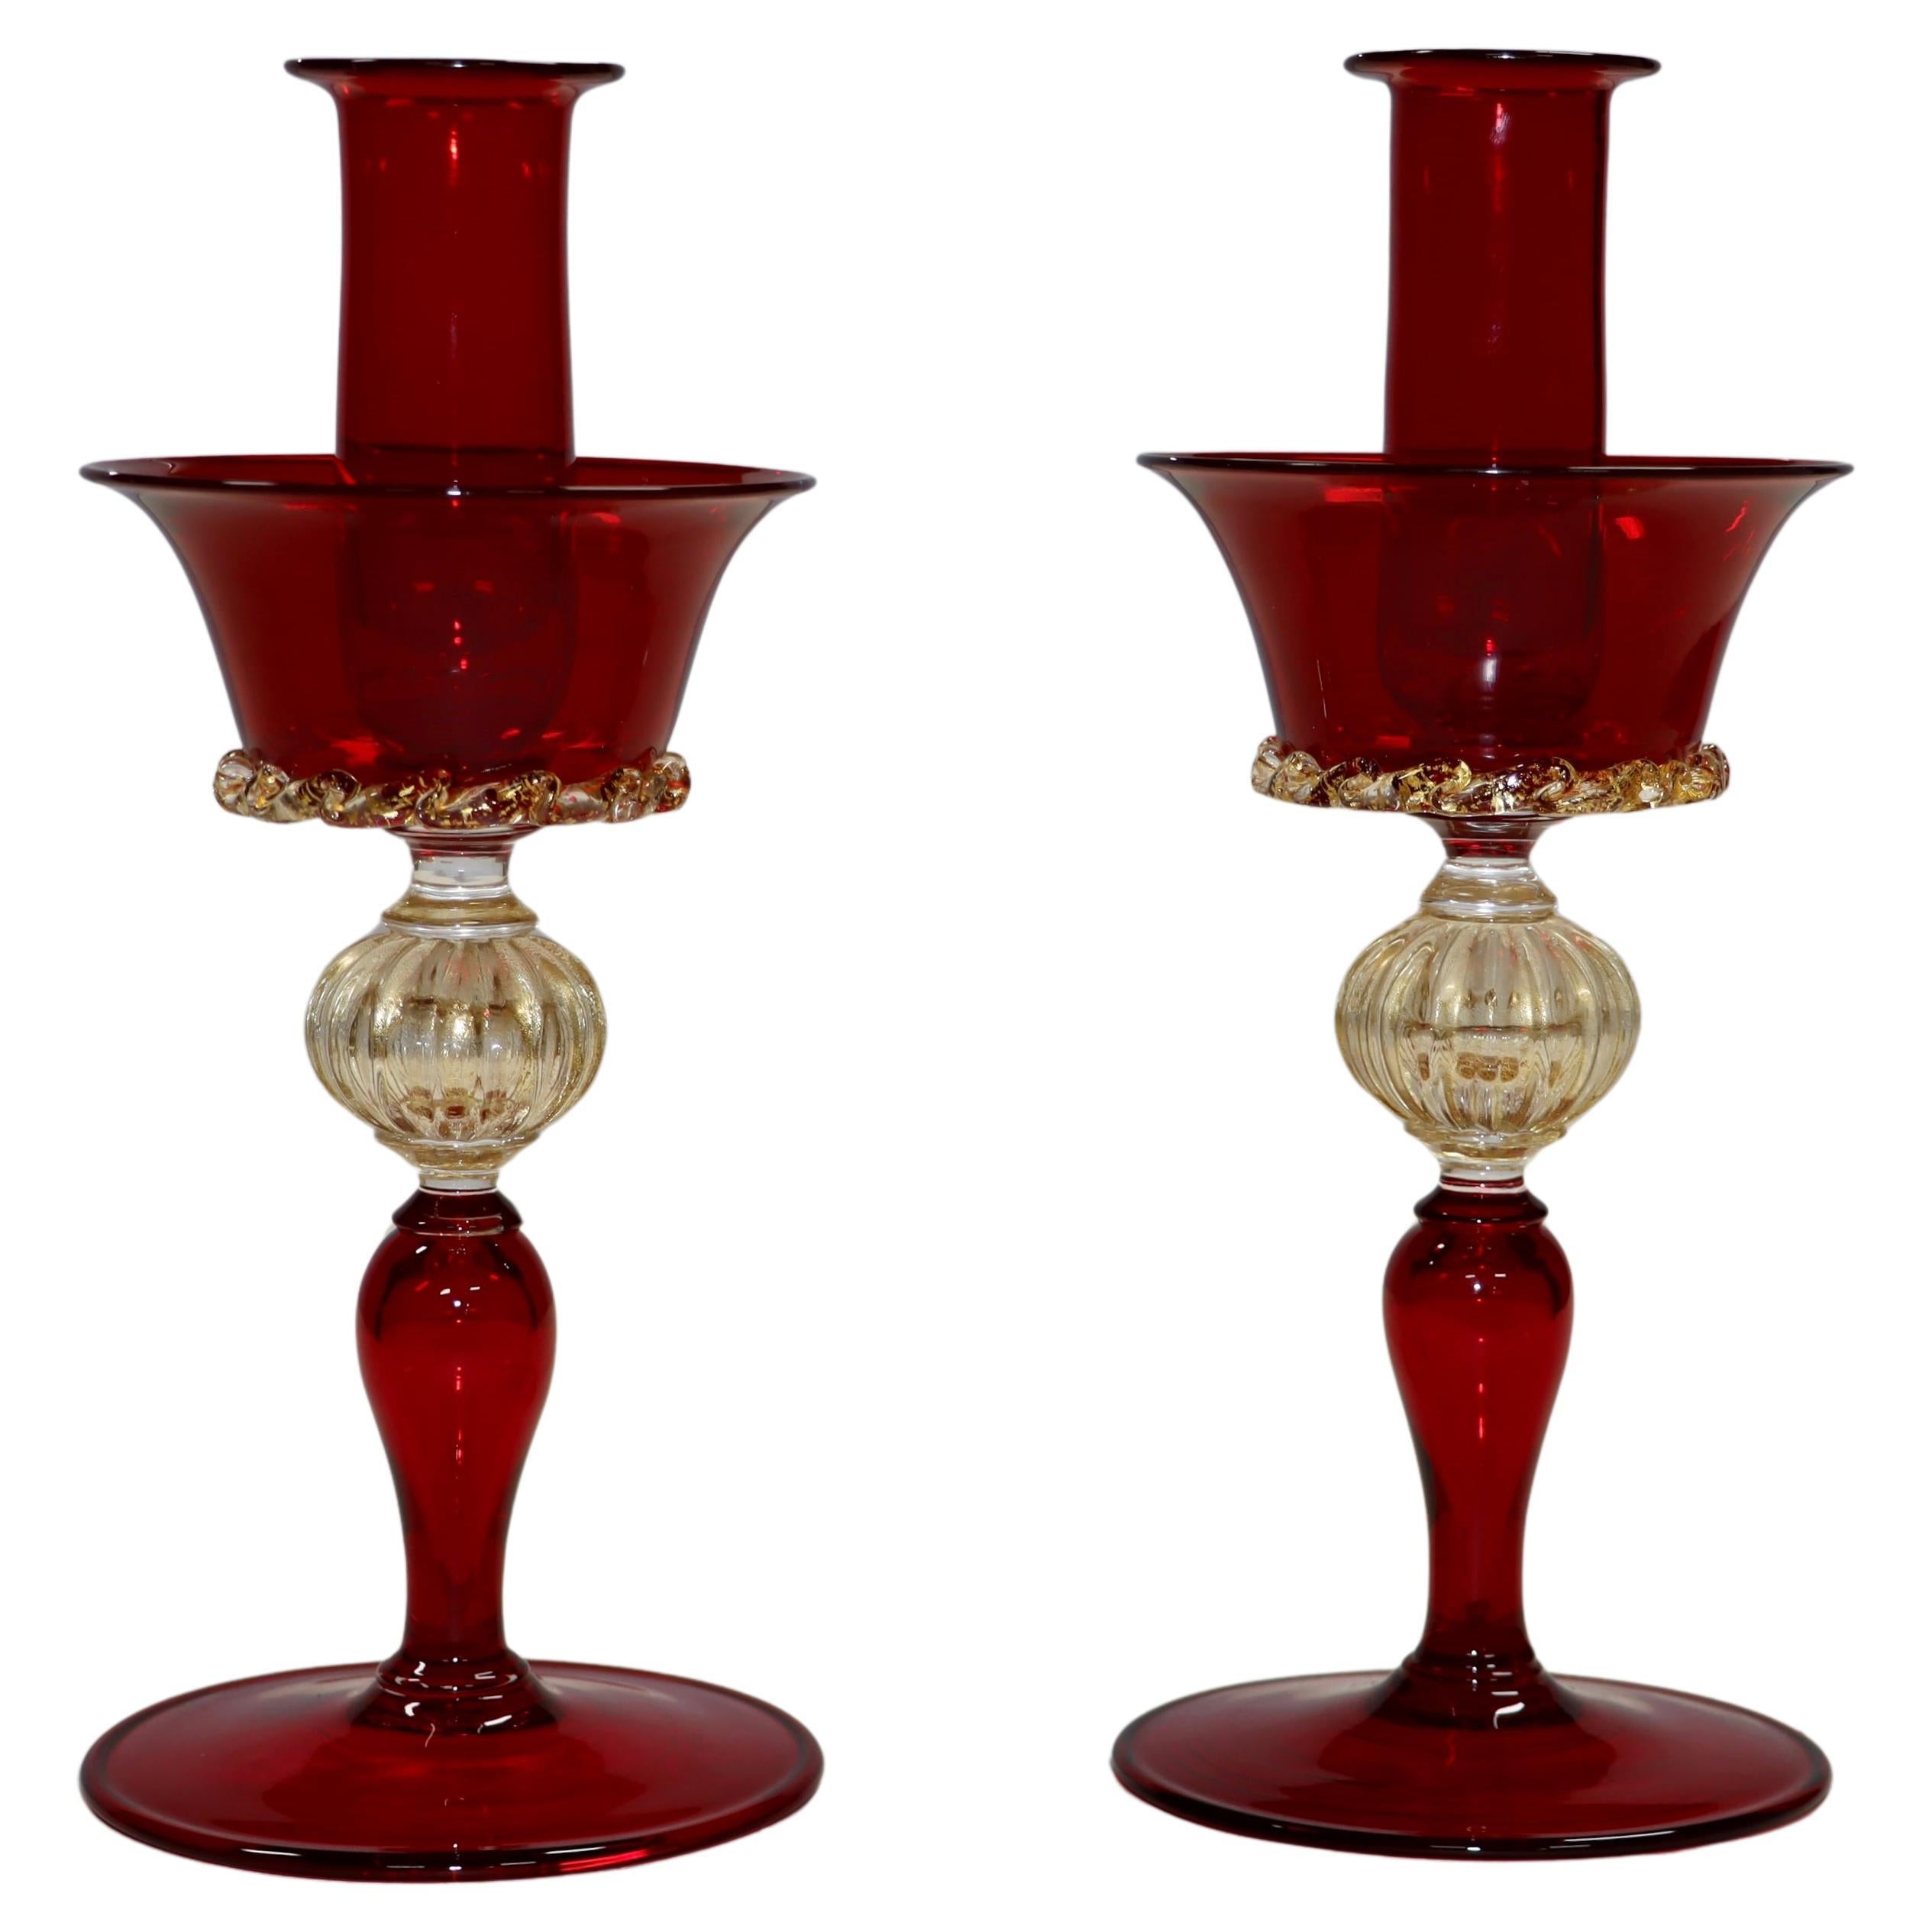  Vintage Murano Gallery Candle Holders